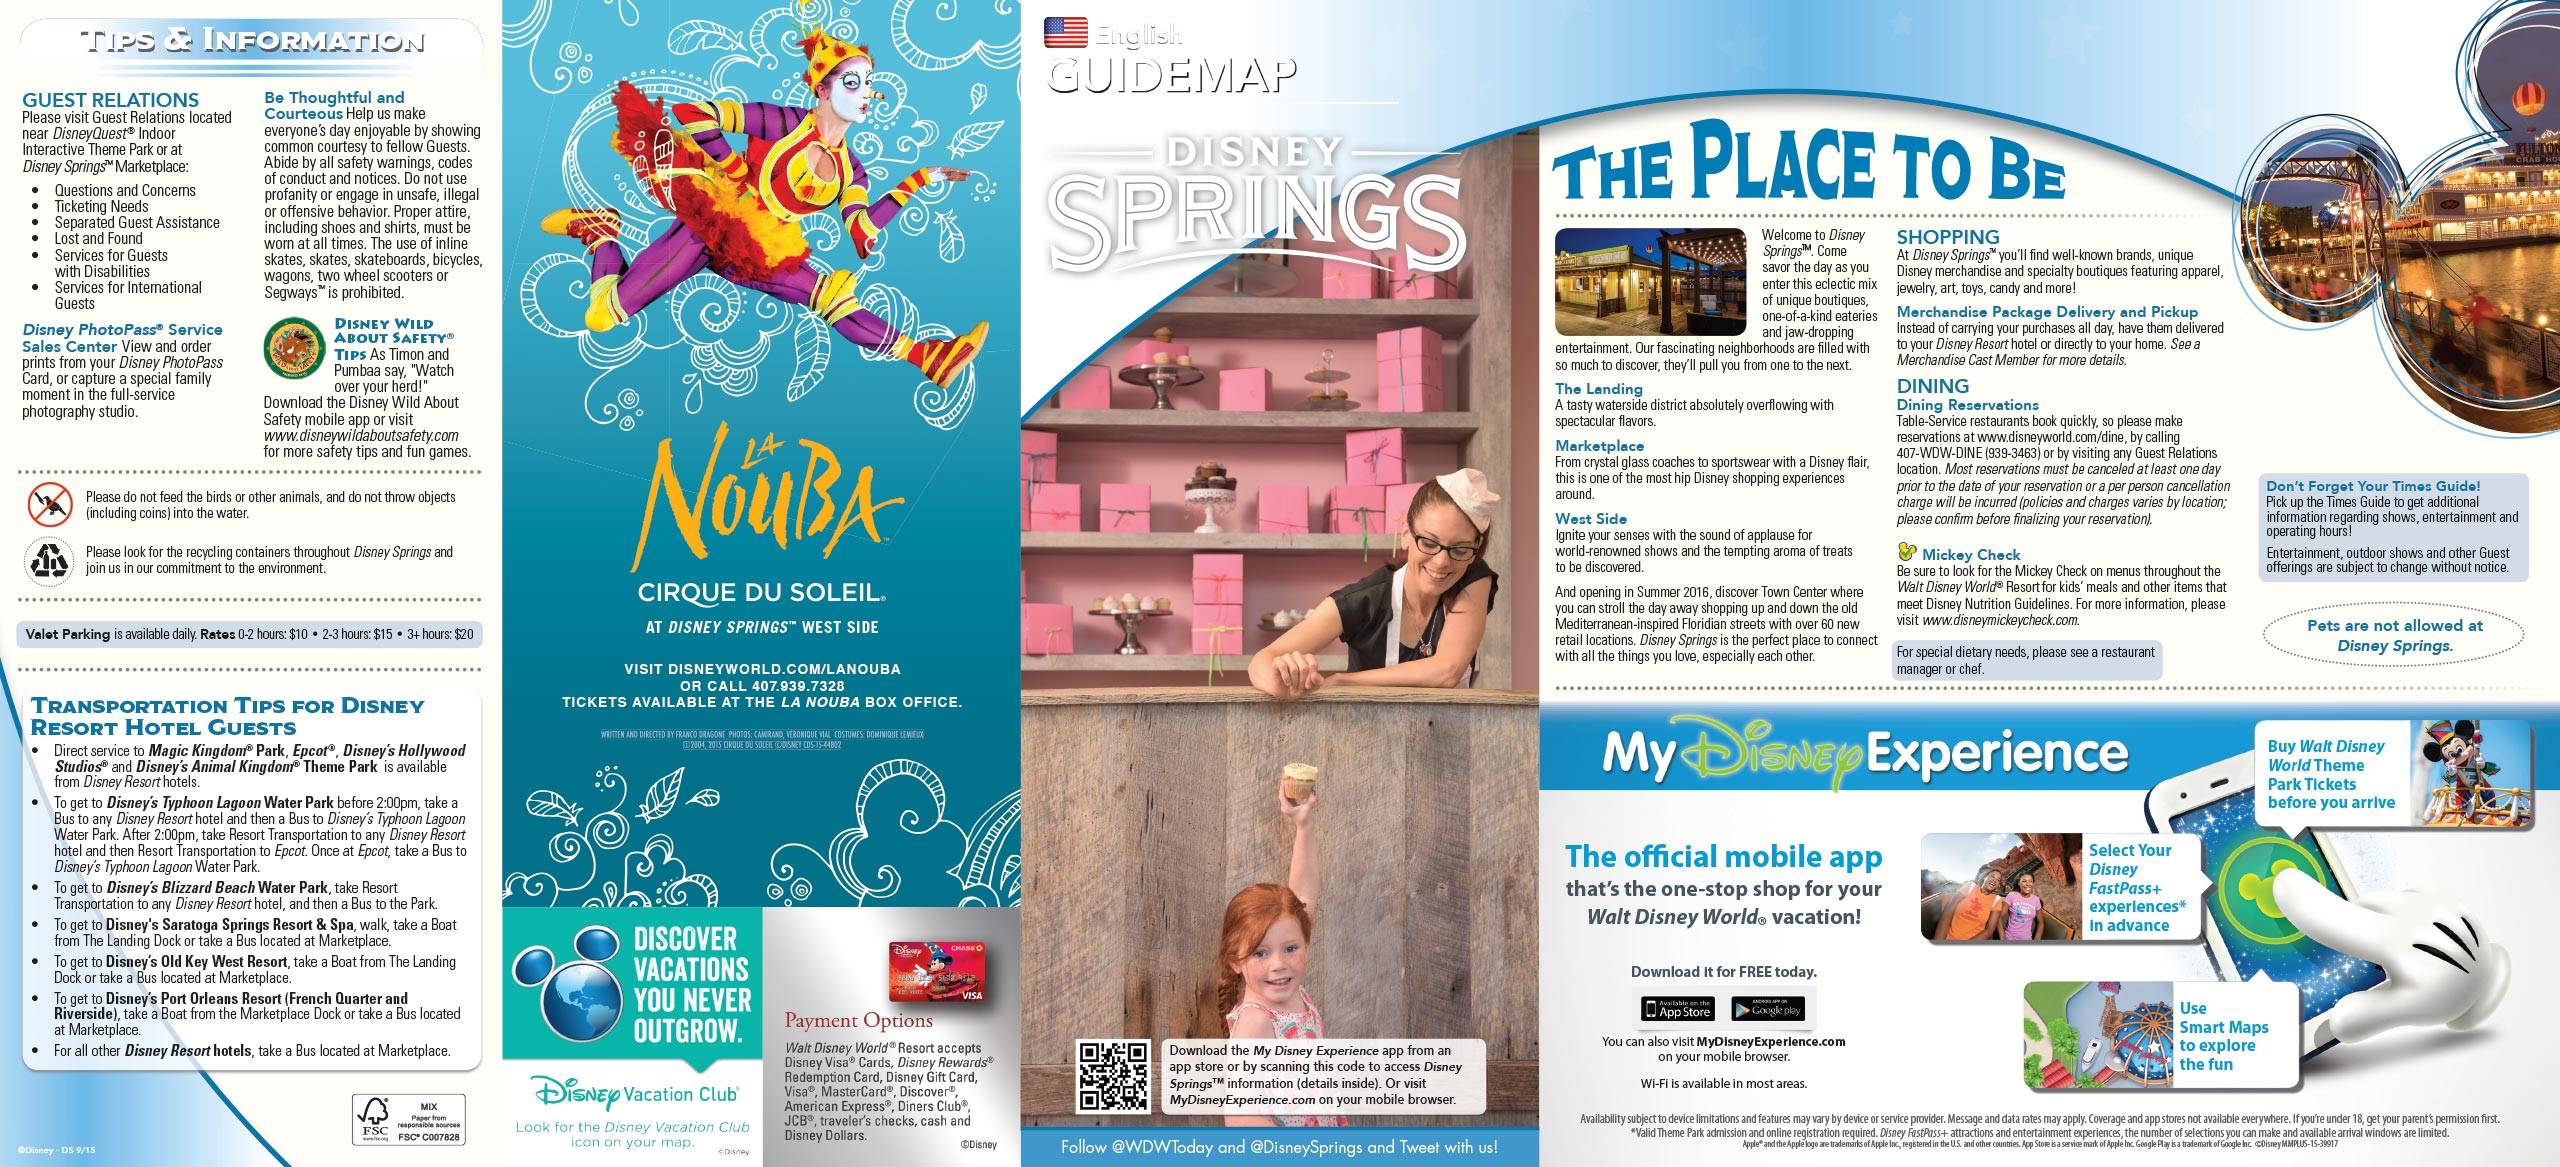 Disney Springs guide map - Front